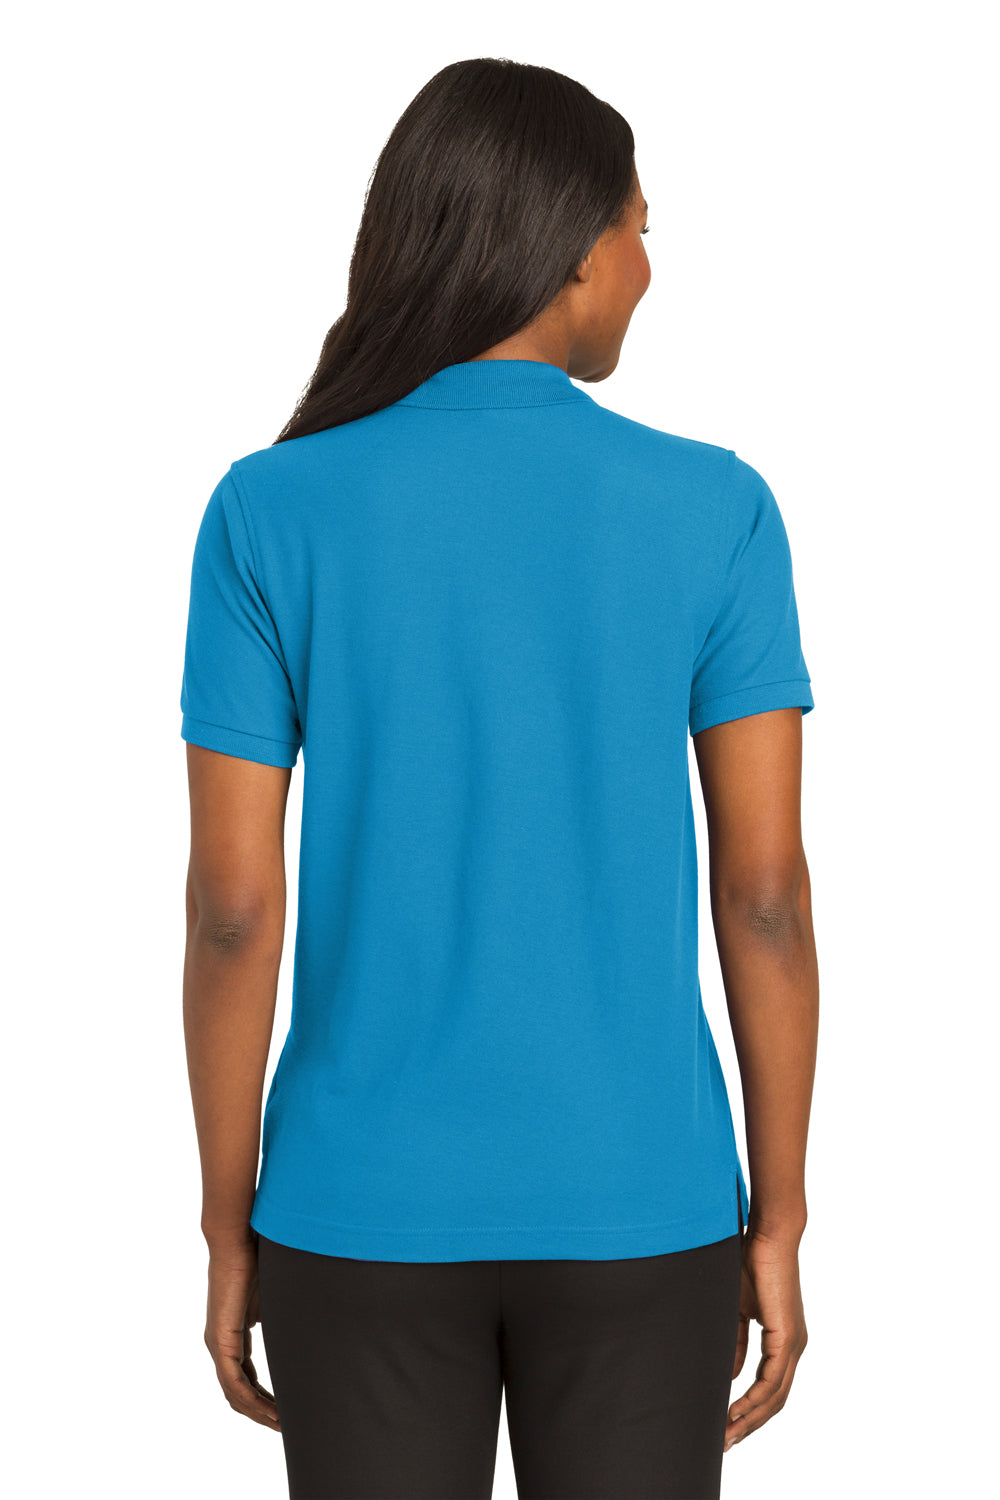 Port Authority L500 Womens Silk Touch Wrinkle Resistant Short Sleeve Polo Shirt Turquoise Blue Back